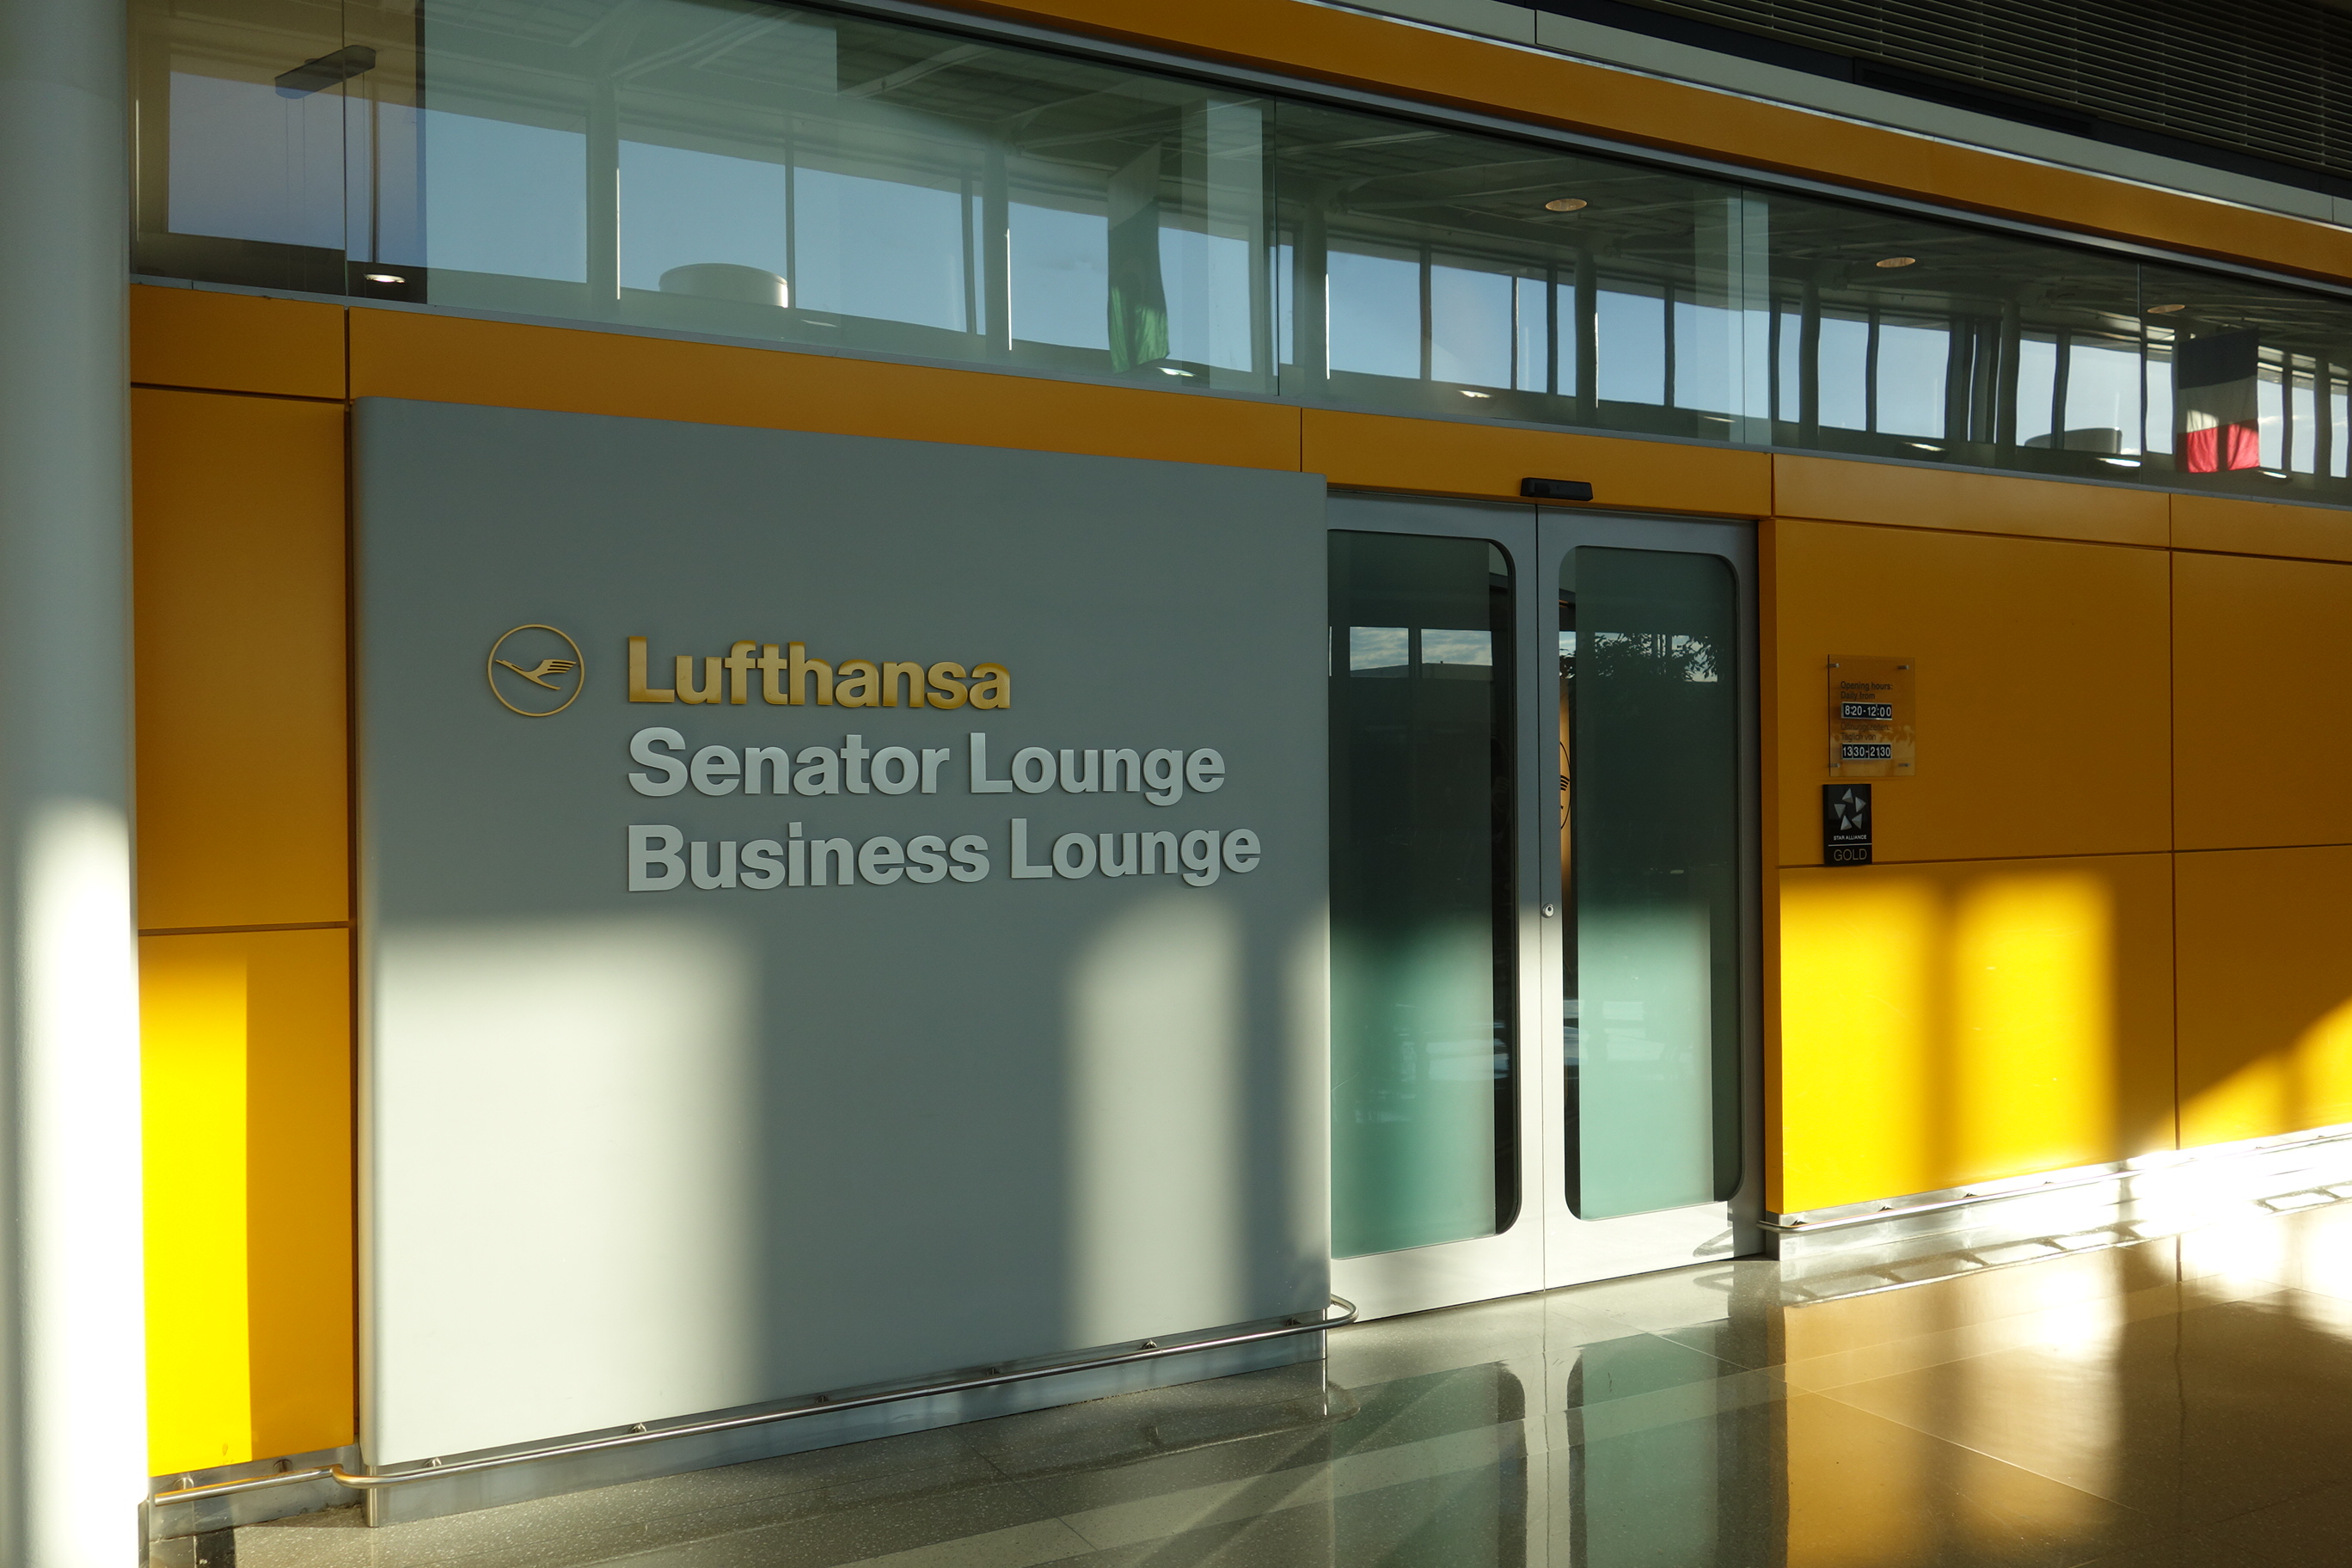 Entrance to the lounge